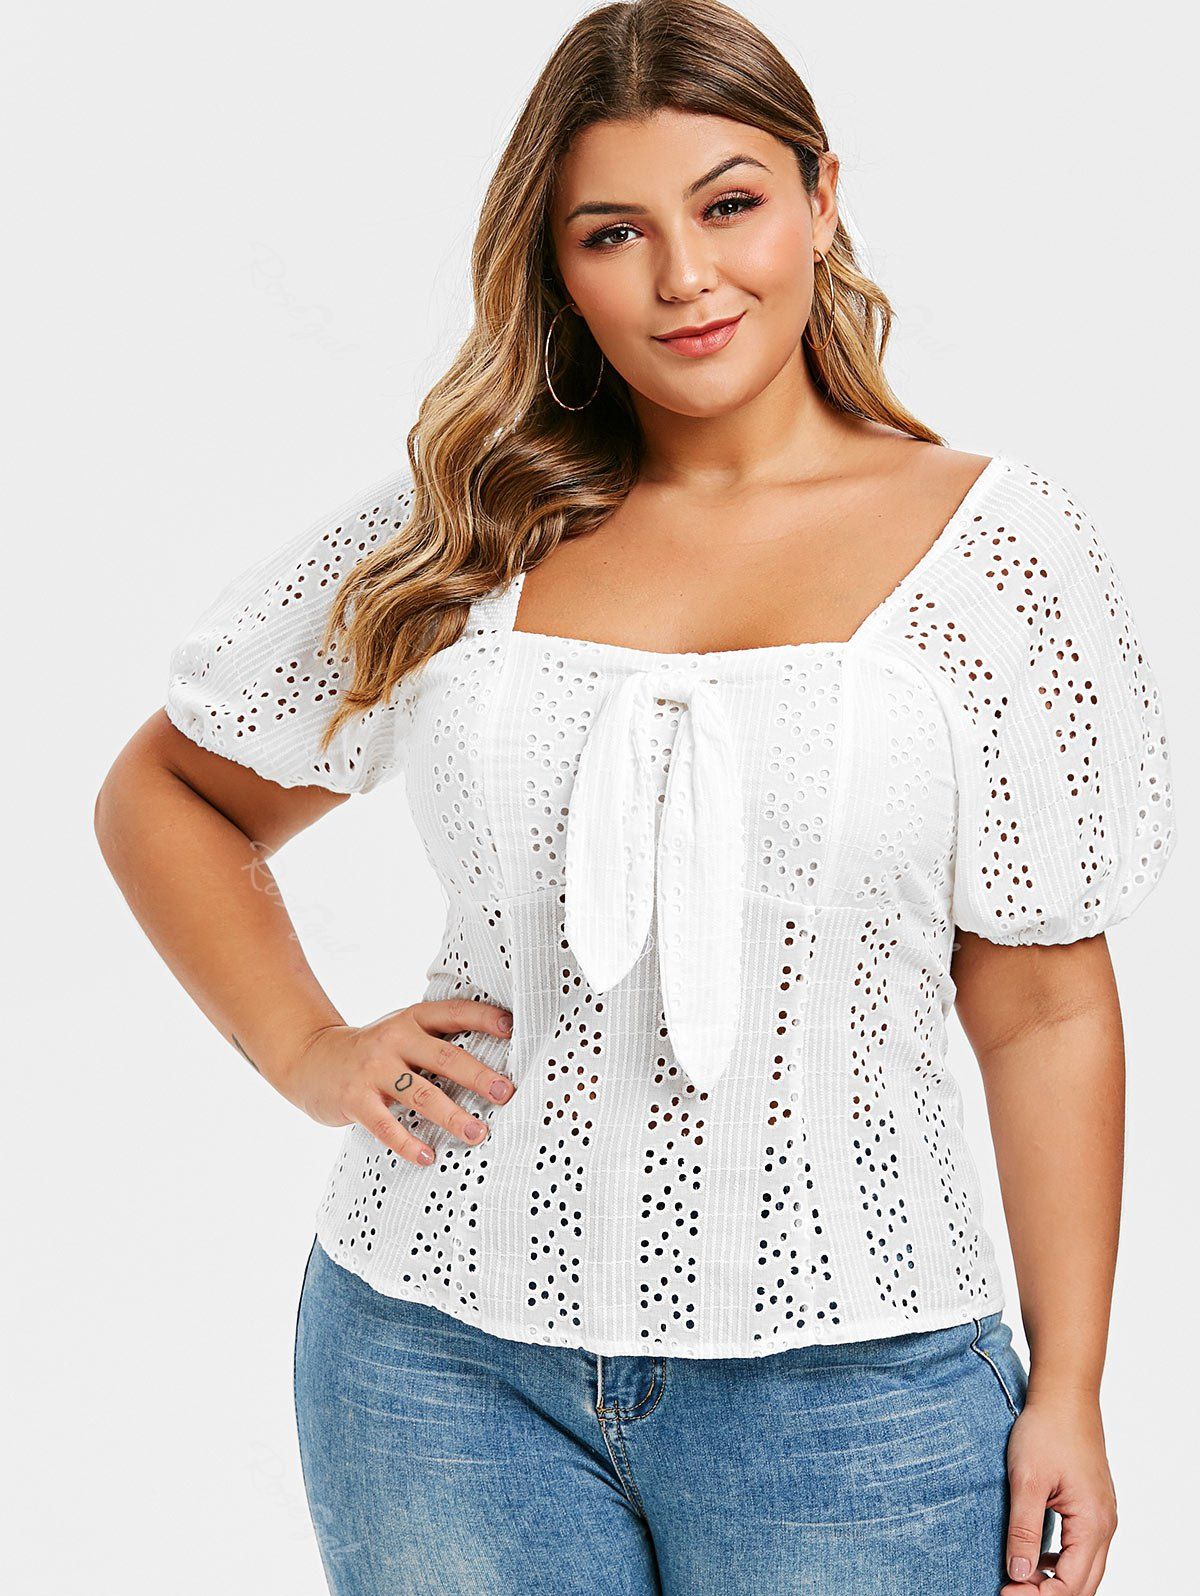 Plus Size Broderie Anglaise Bowknot Milkmaid Top - 3x